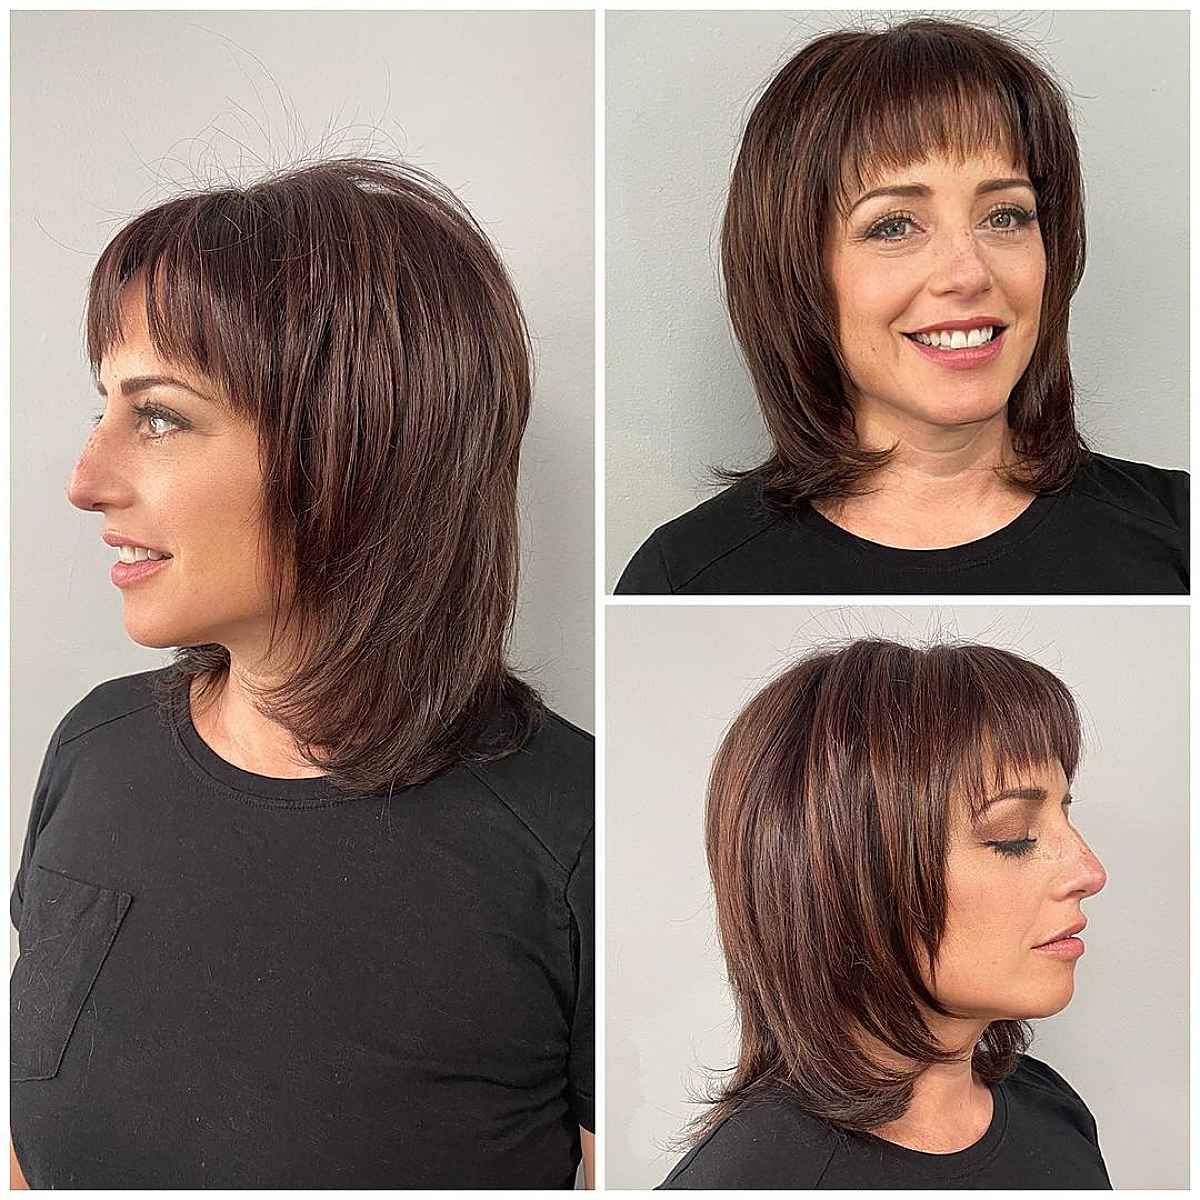 51 Low Maintenance Shaggy Haircuts With Bangs For Busy & Trendy Women Within Popular Low Maintenance Shag For Thin Hair (View 3 of 15)